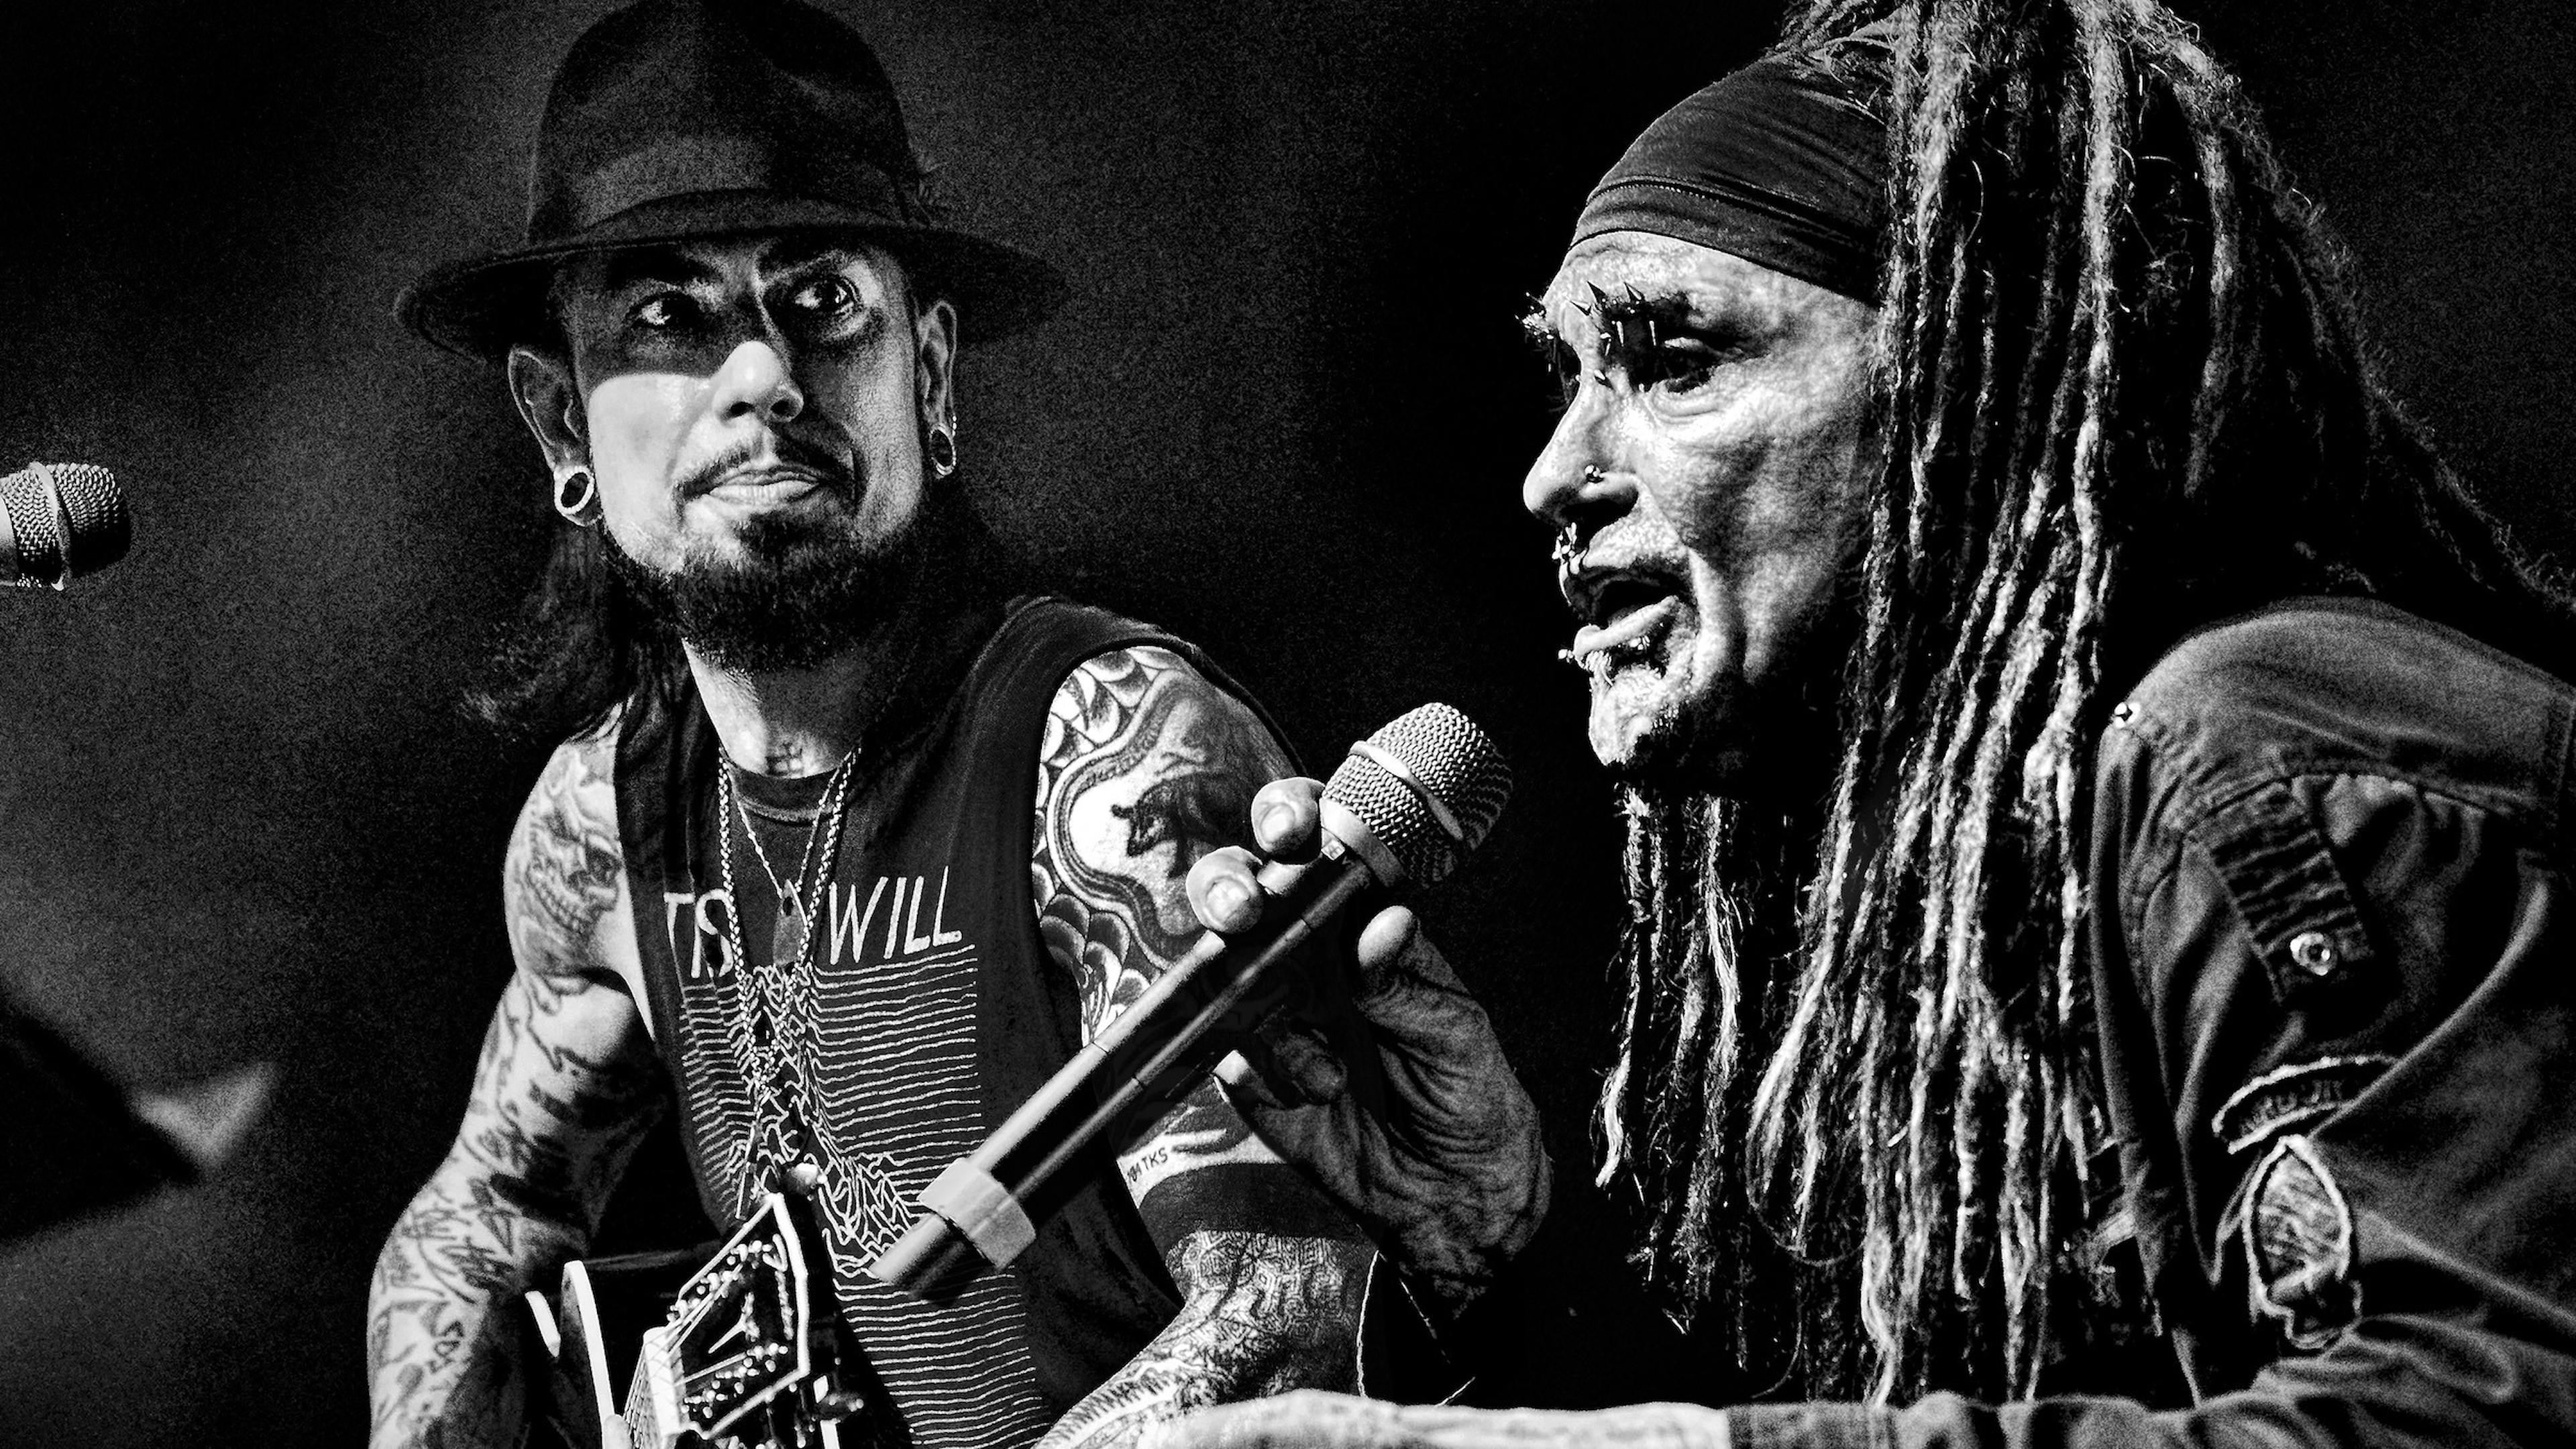 "I Shaved My Chest To Fit Into This Girdle": Inside Ministry's New Photo Book With Al Jourgensen